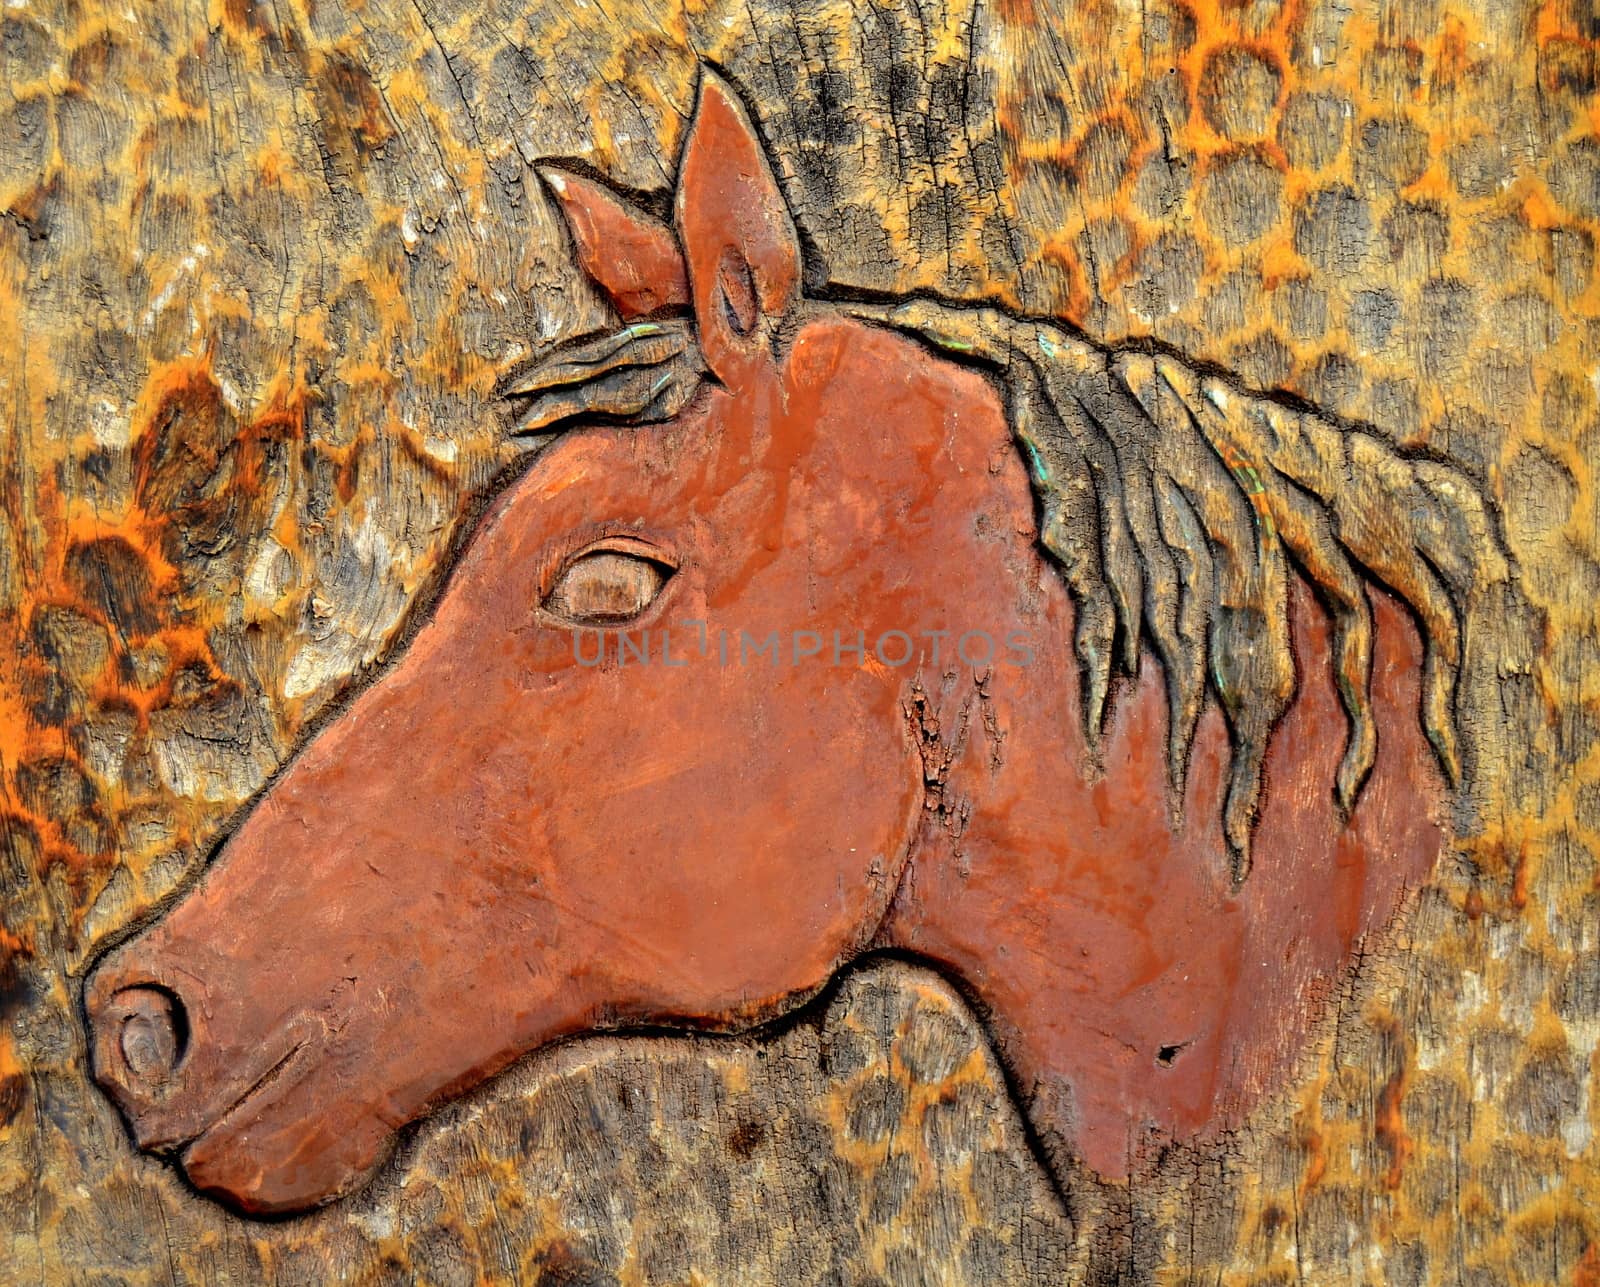 Rustic Vintage Wood Carving Portrait Of A Horse